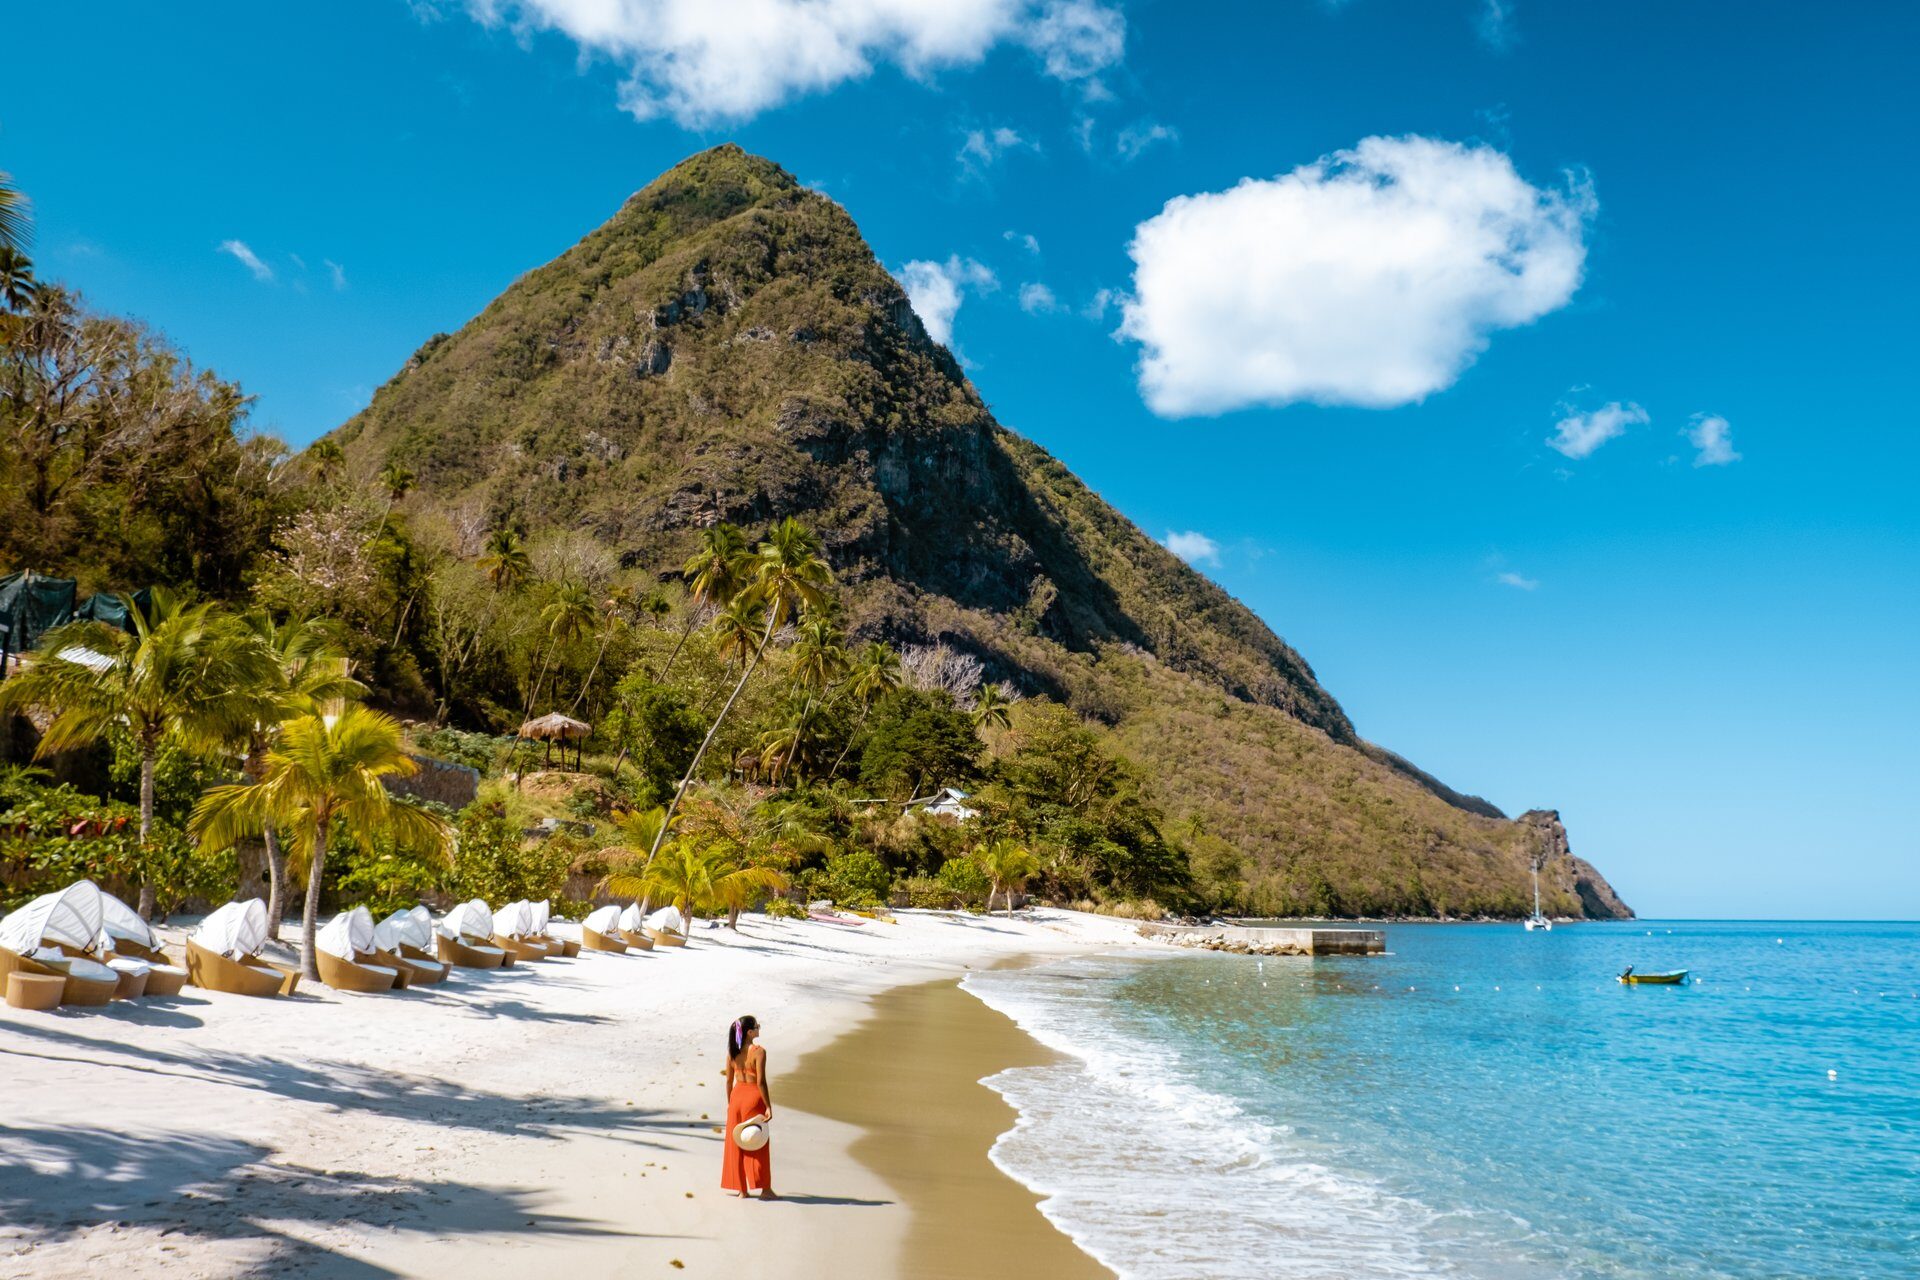 St Lucia Holiday Deals from £825! Book now & pay in 